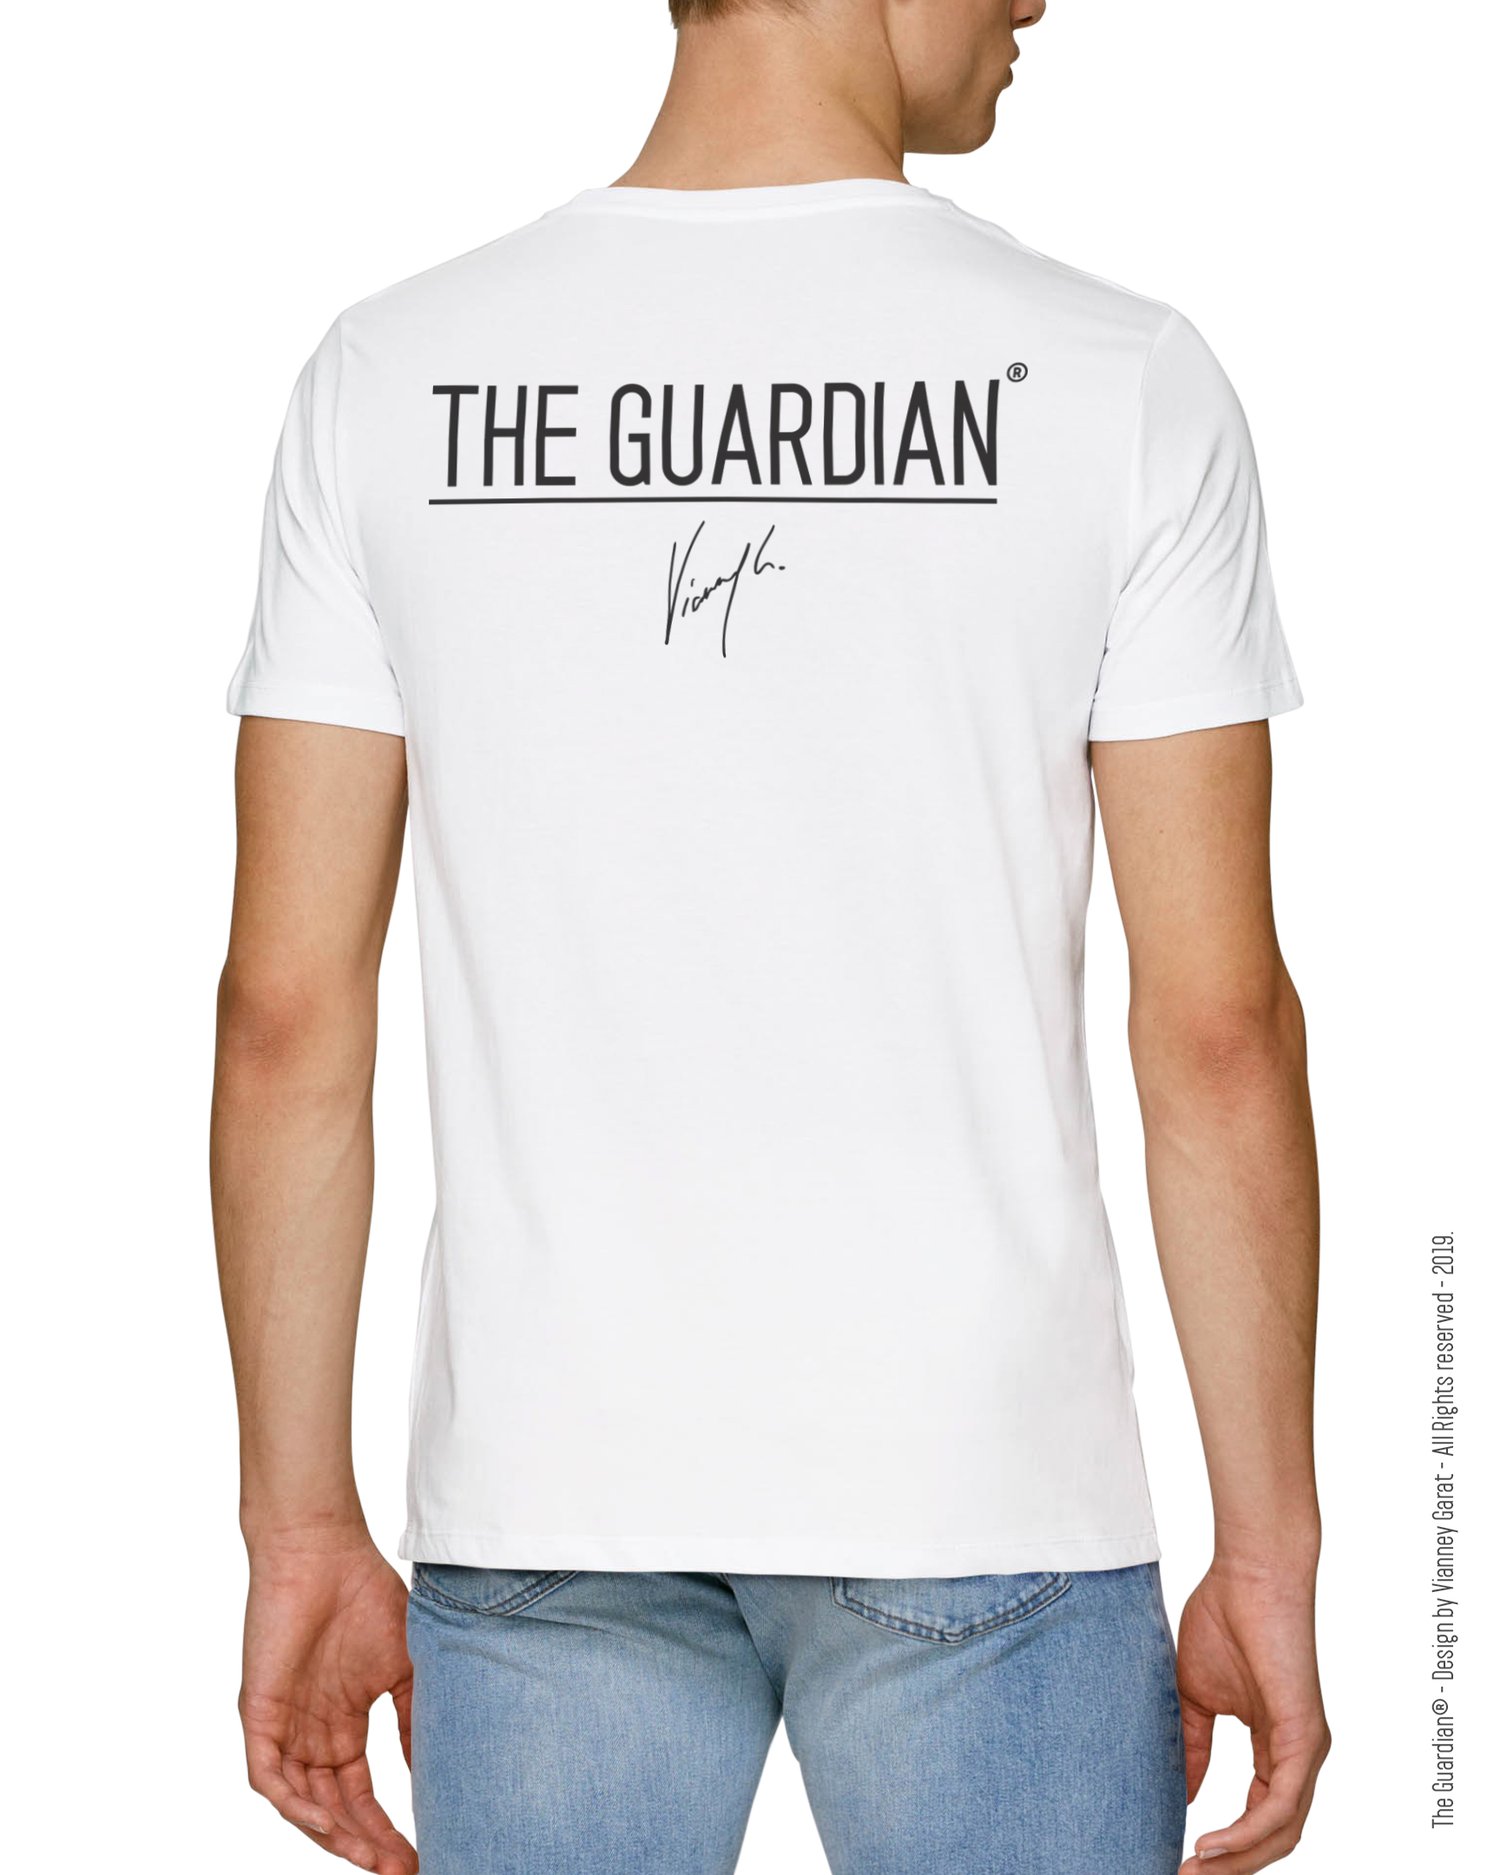 Image of T-SHIRT THE GUARDIAN® - ANGEL EDITION - Limited Edition